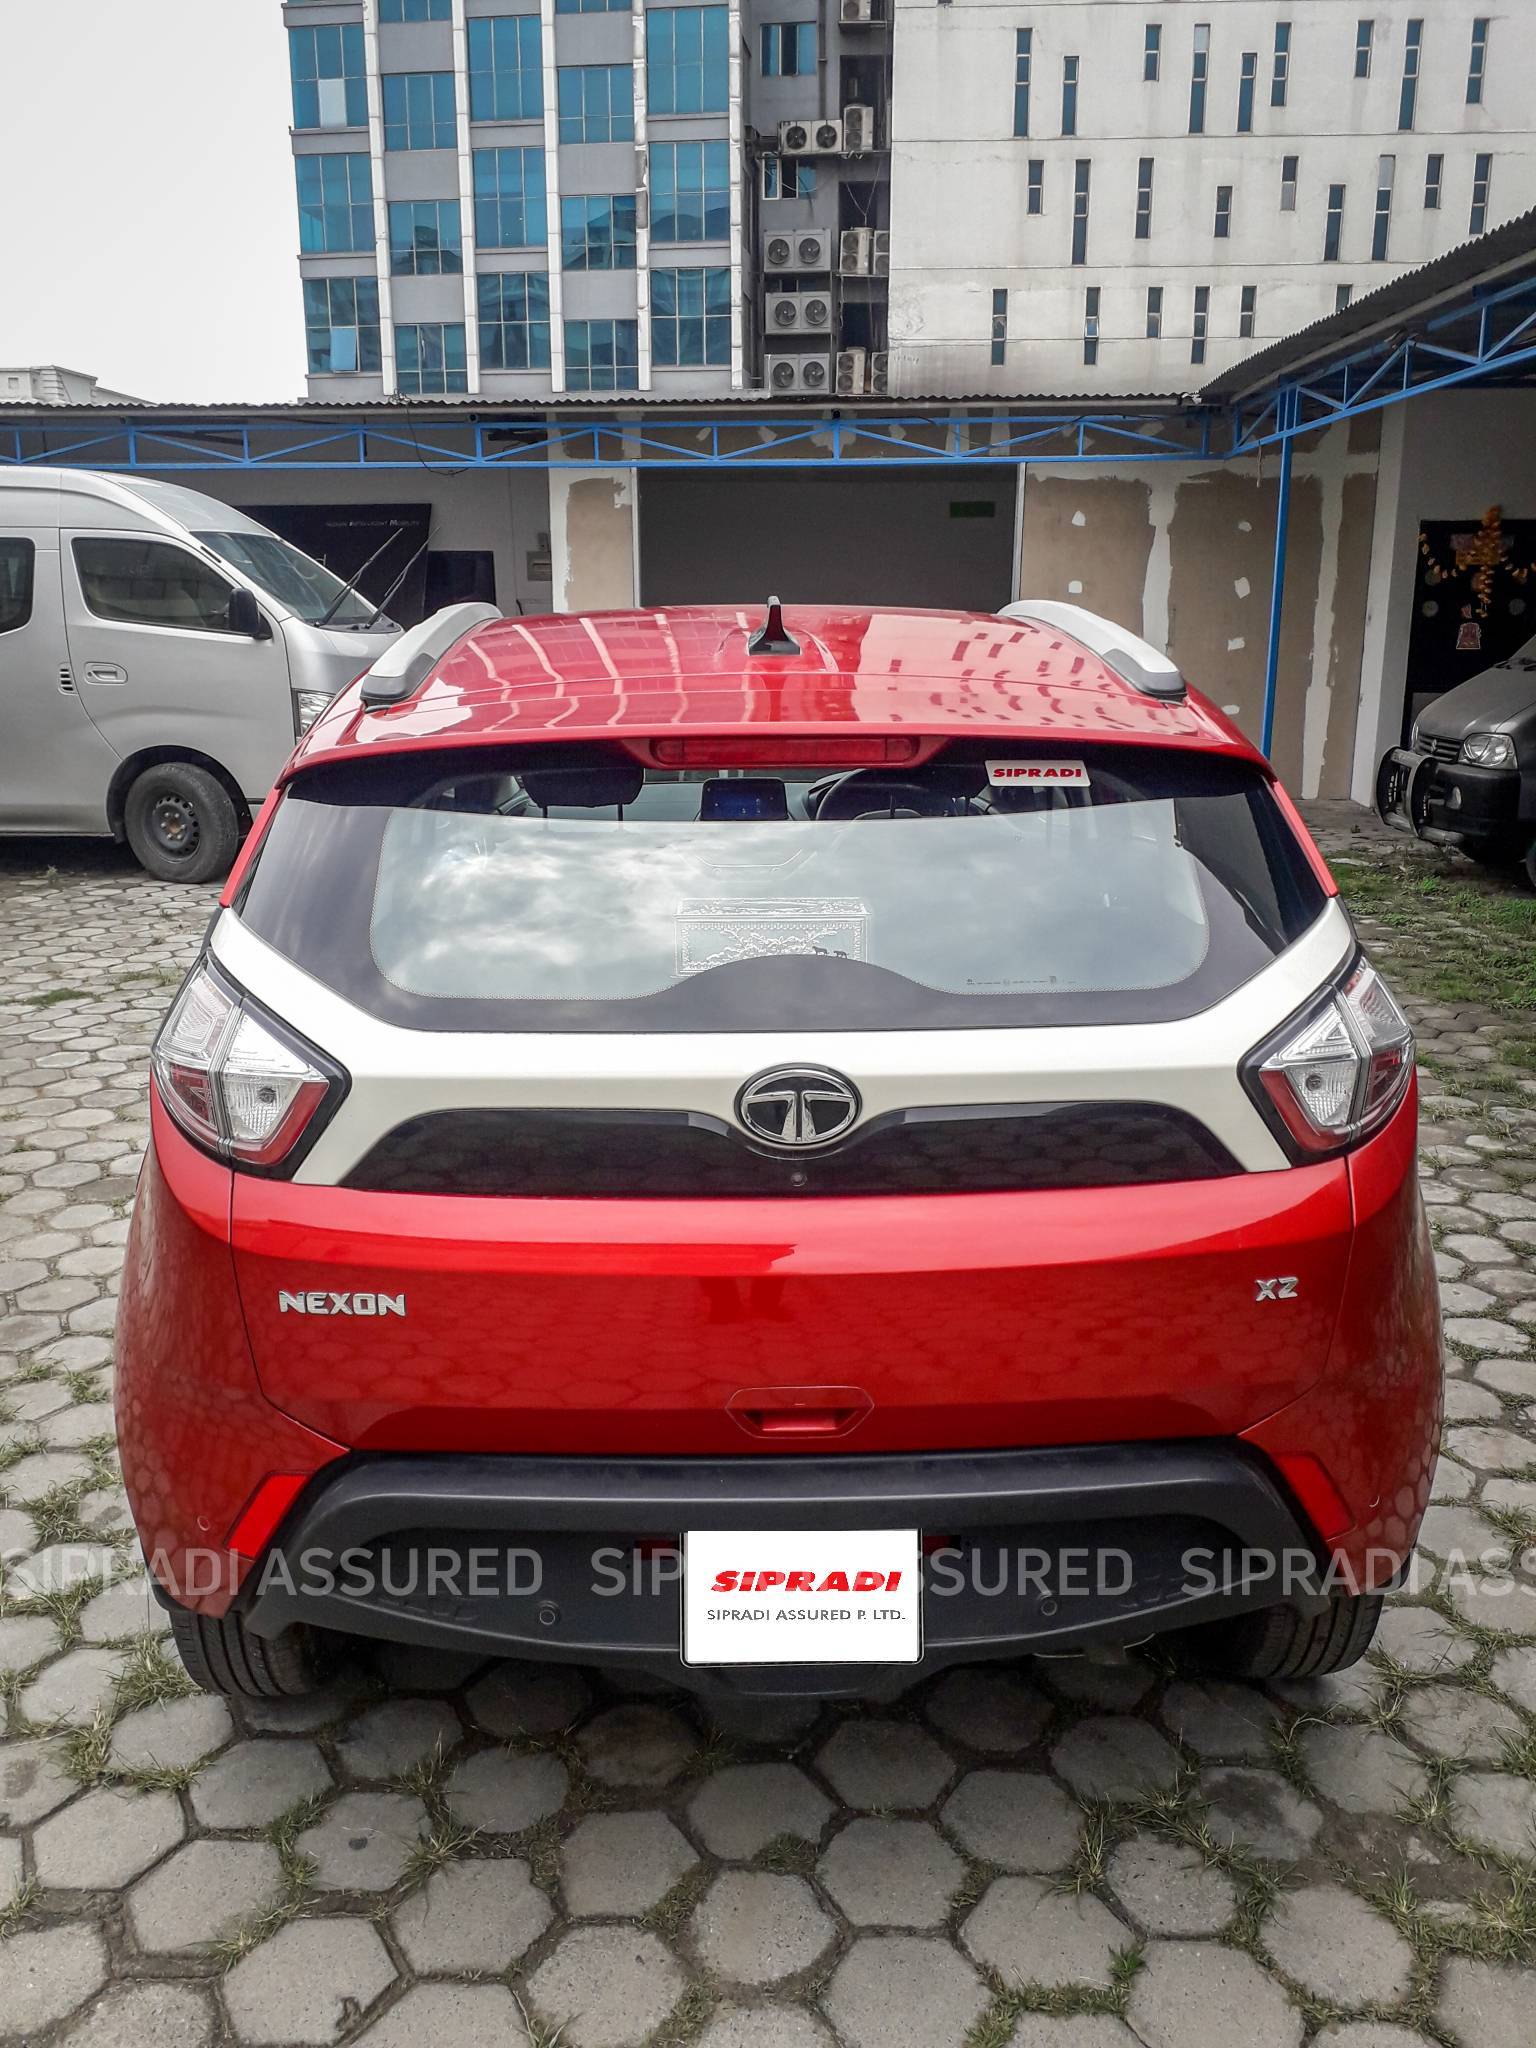 Best secondhand cars in nepal
Pre-owned car
secondhand tata nexon nepal